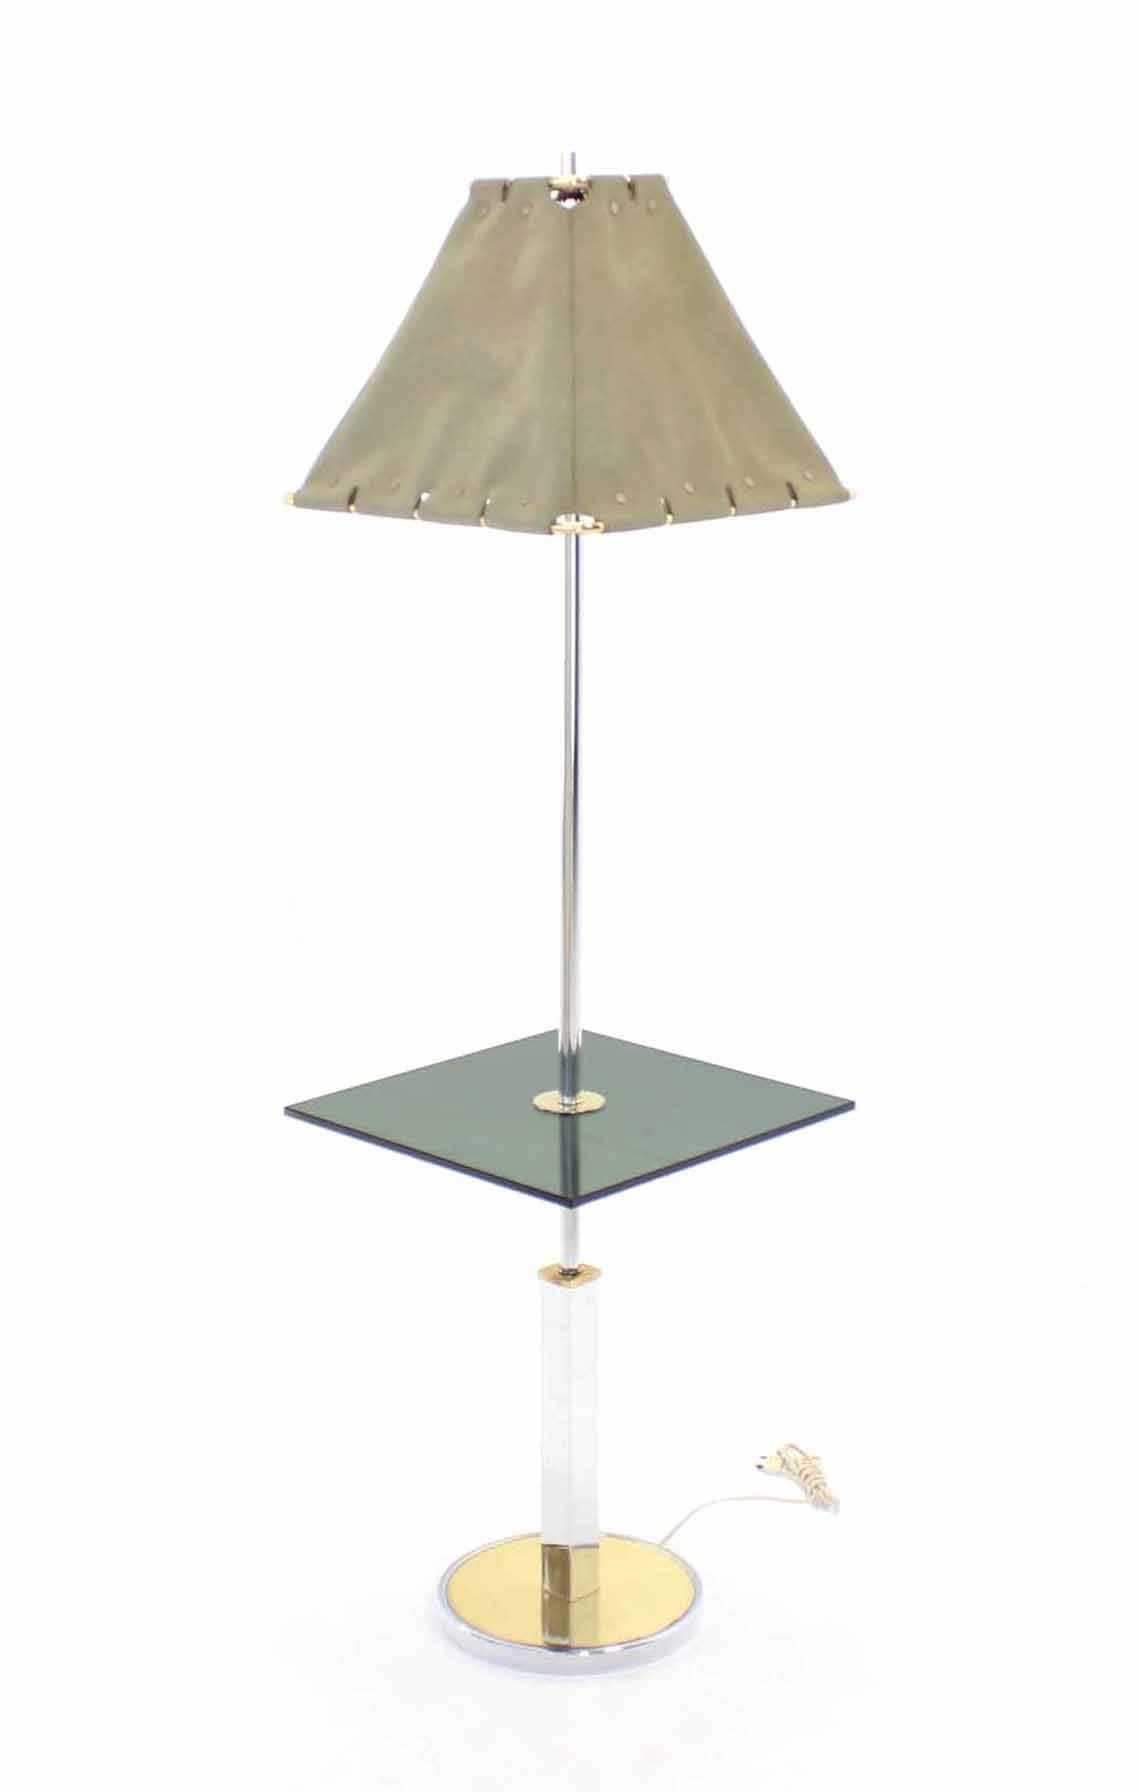 Very nice mid-century modern floor lamp side table with original faux leather shade.